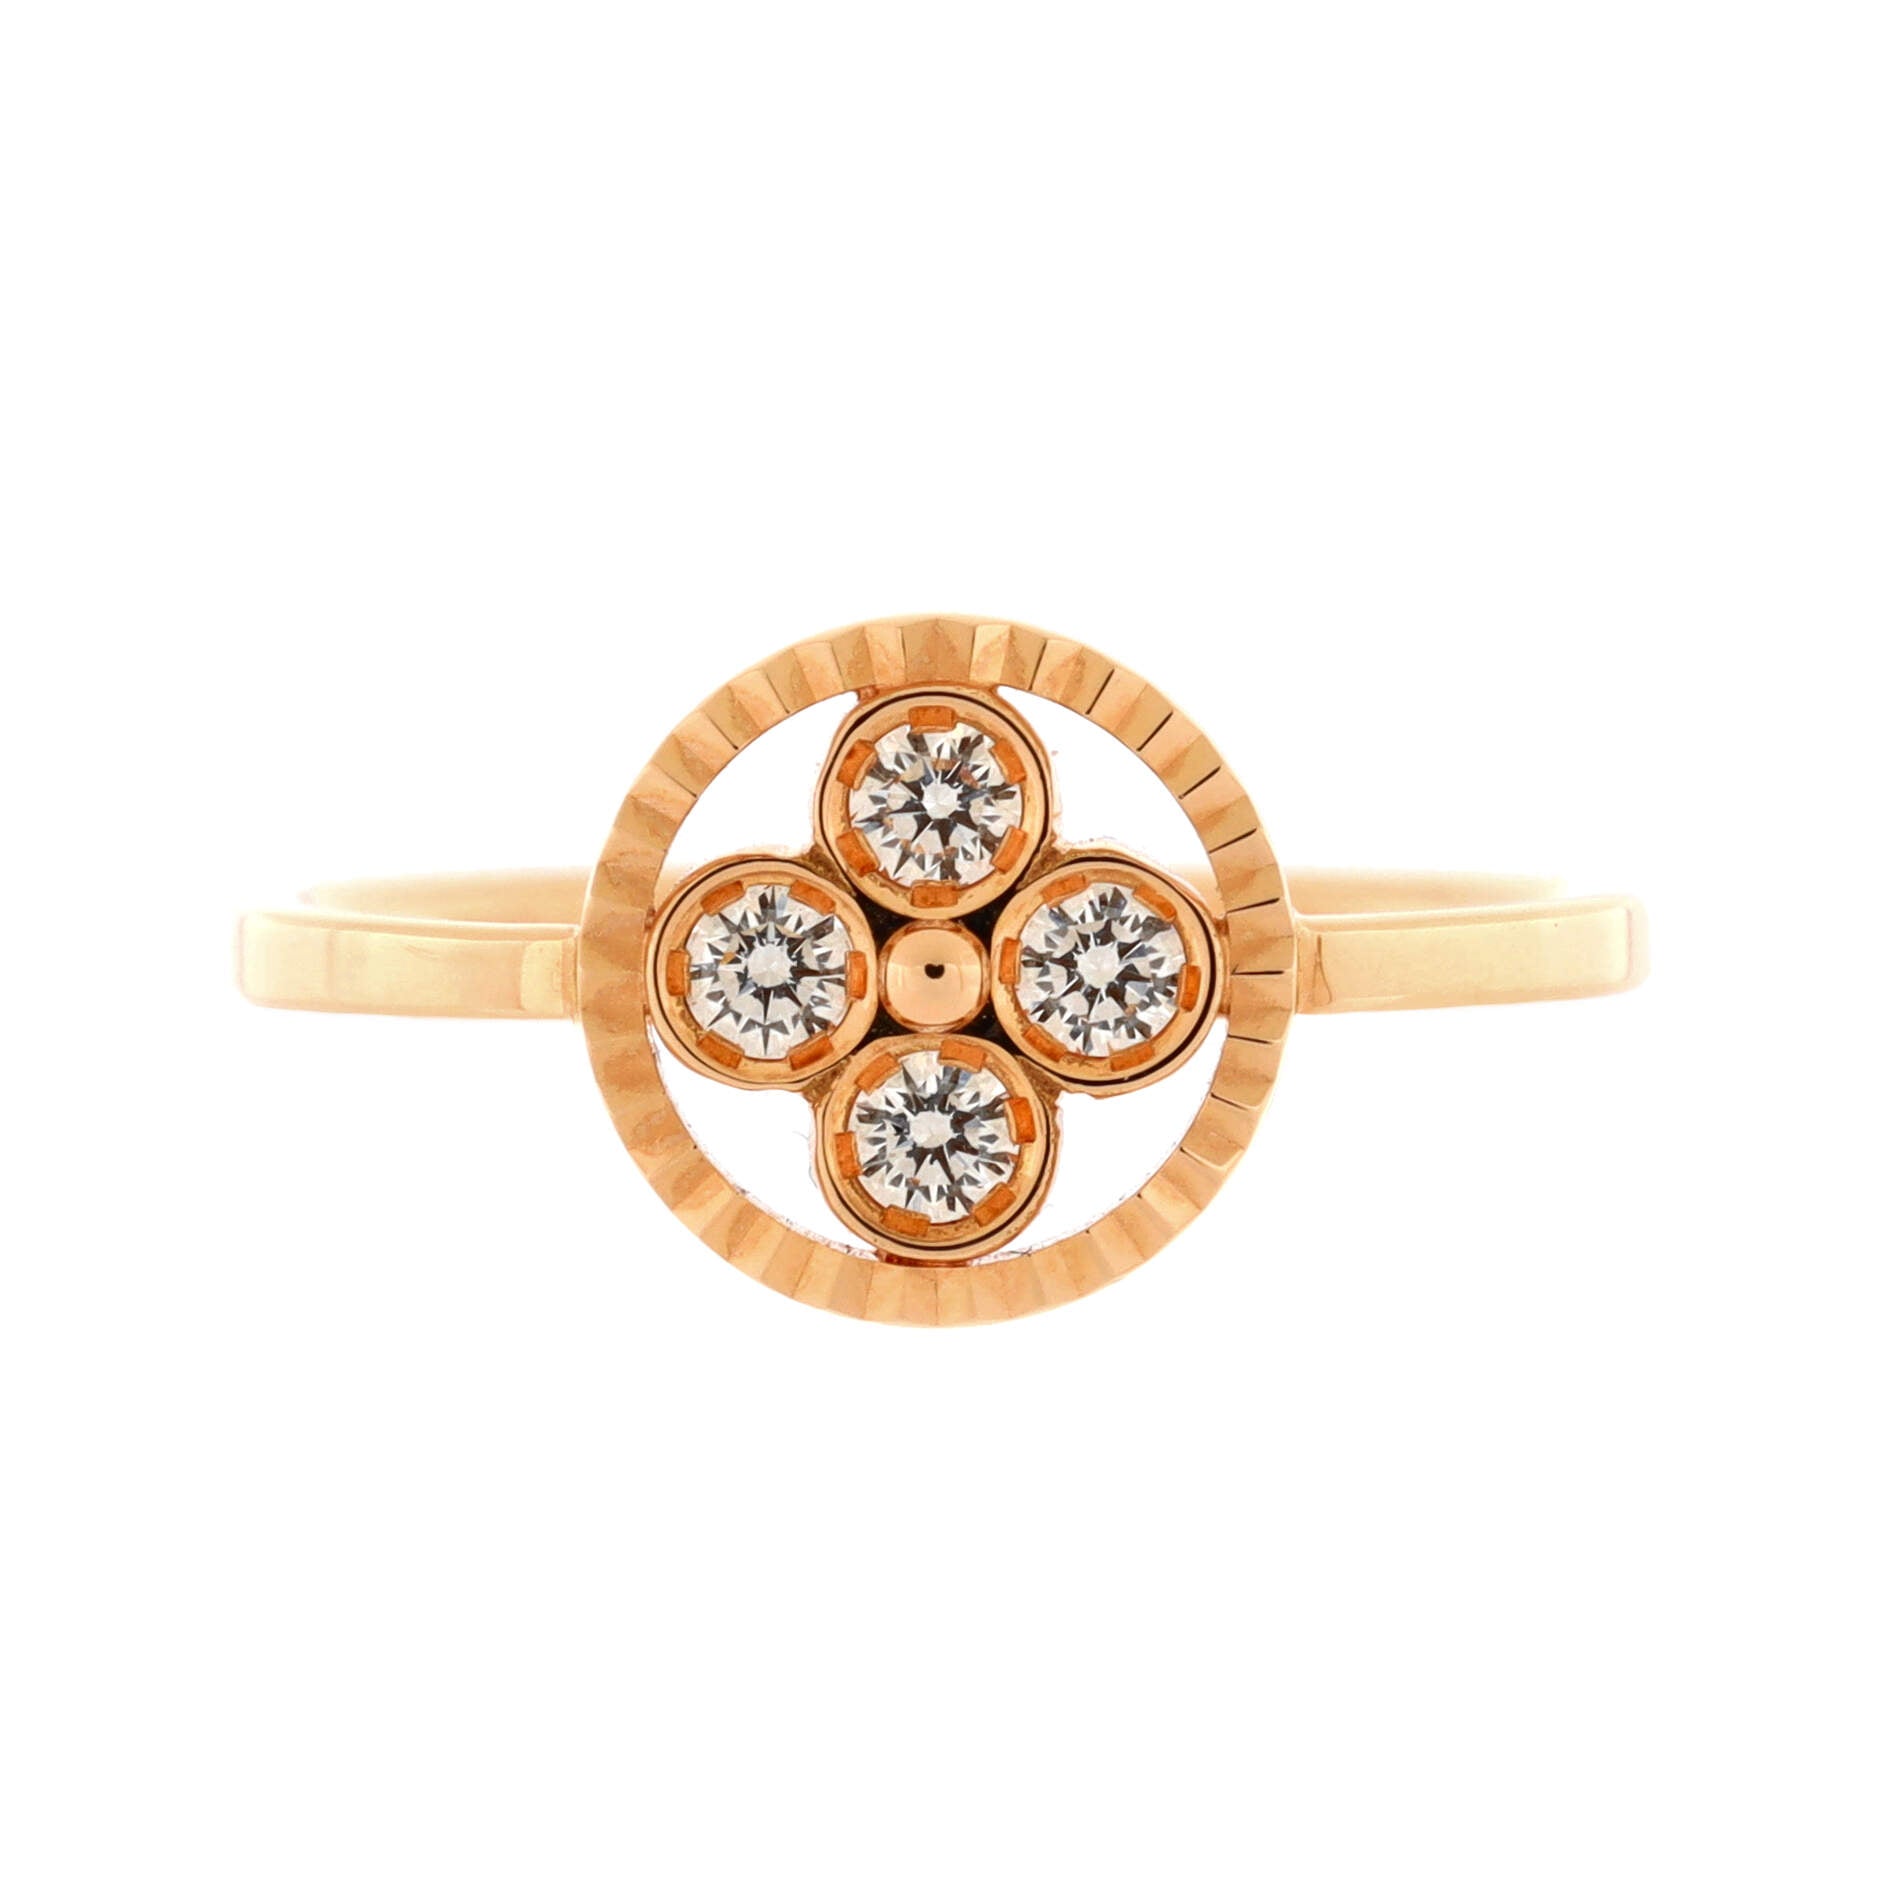 LOUIS VUITTON Flower full ring M68130｜Product Code：2100300982162｜BRAND OFF  Online Store